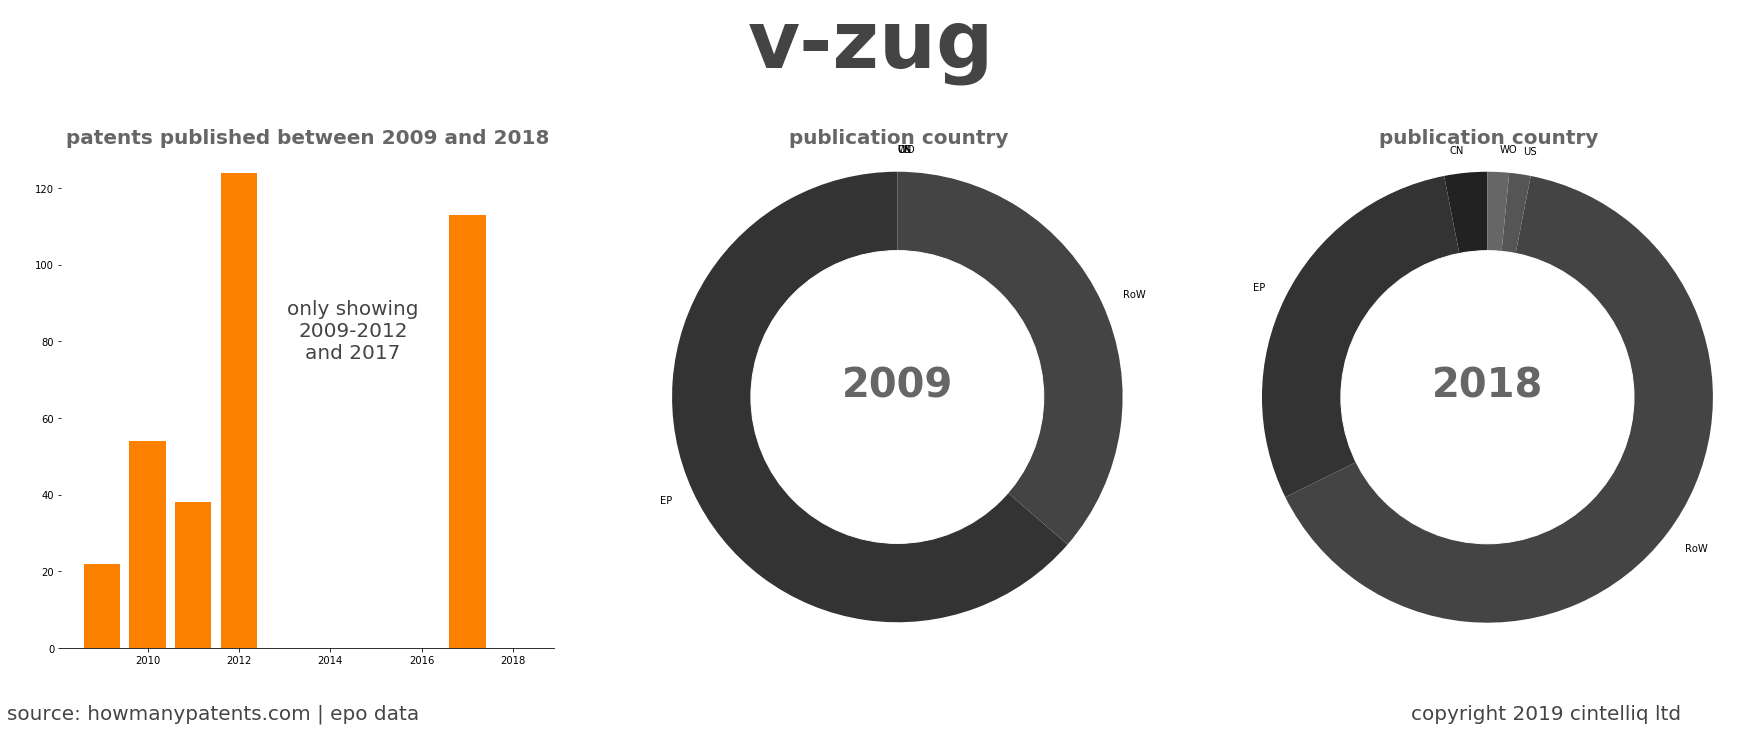 summary of patents for V-Zug